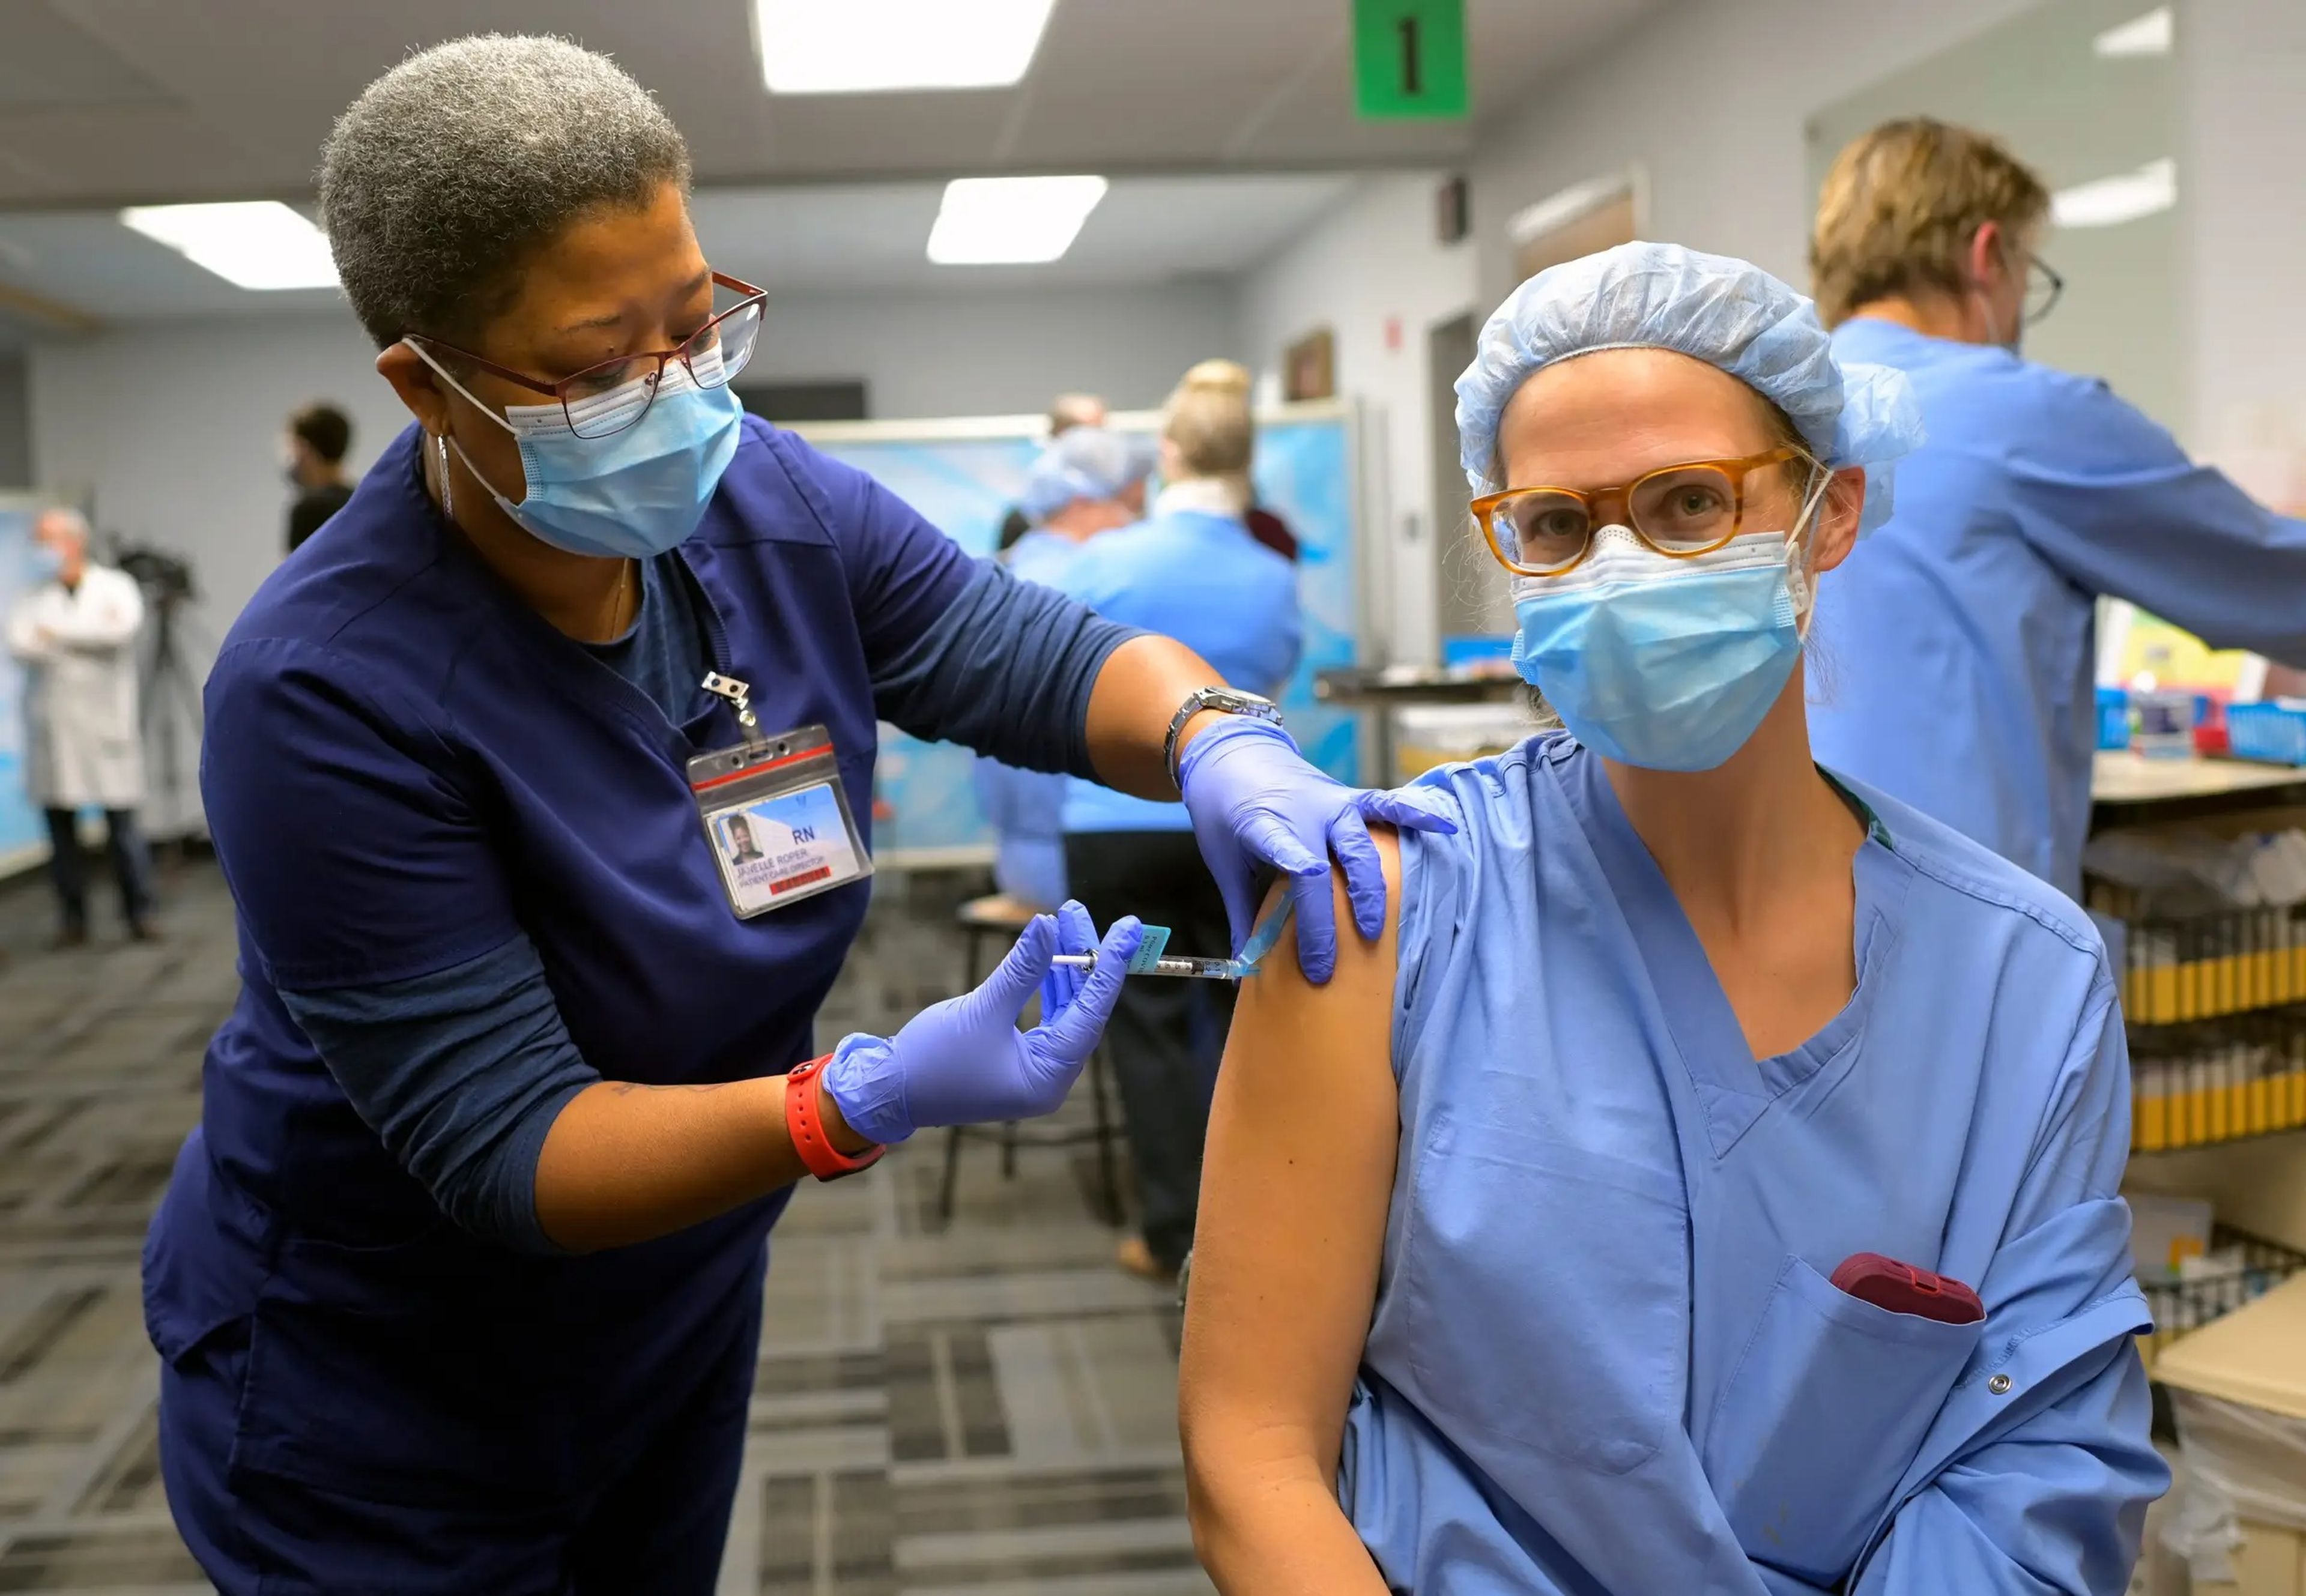 RN Janelle Roper, left, administers the Pfizer Covid-19 vaccine to Nurse Anesthetist Kate-Alden Hartman.